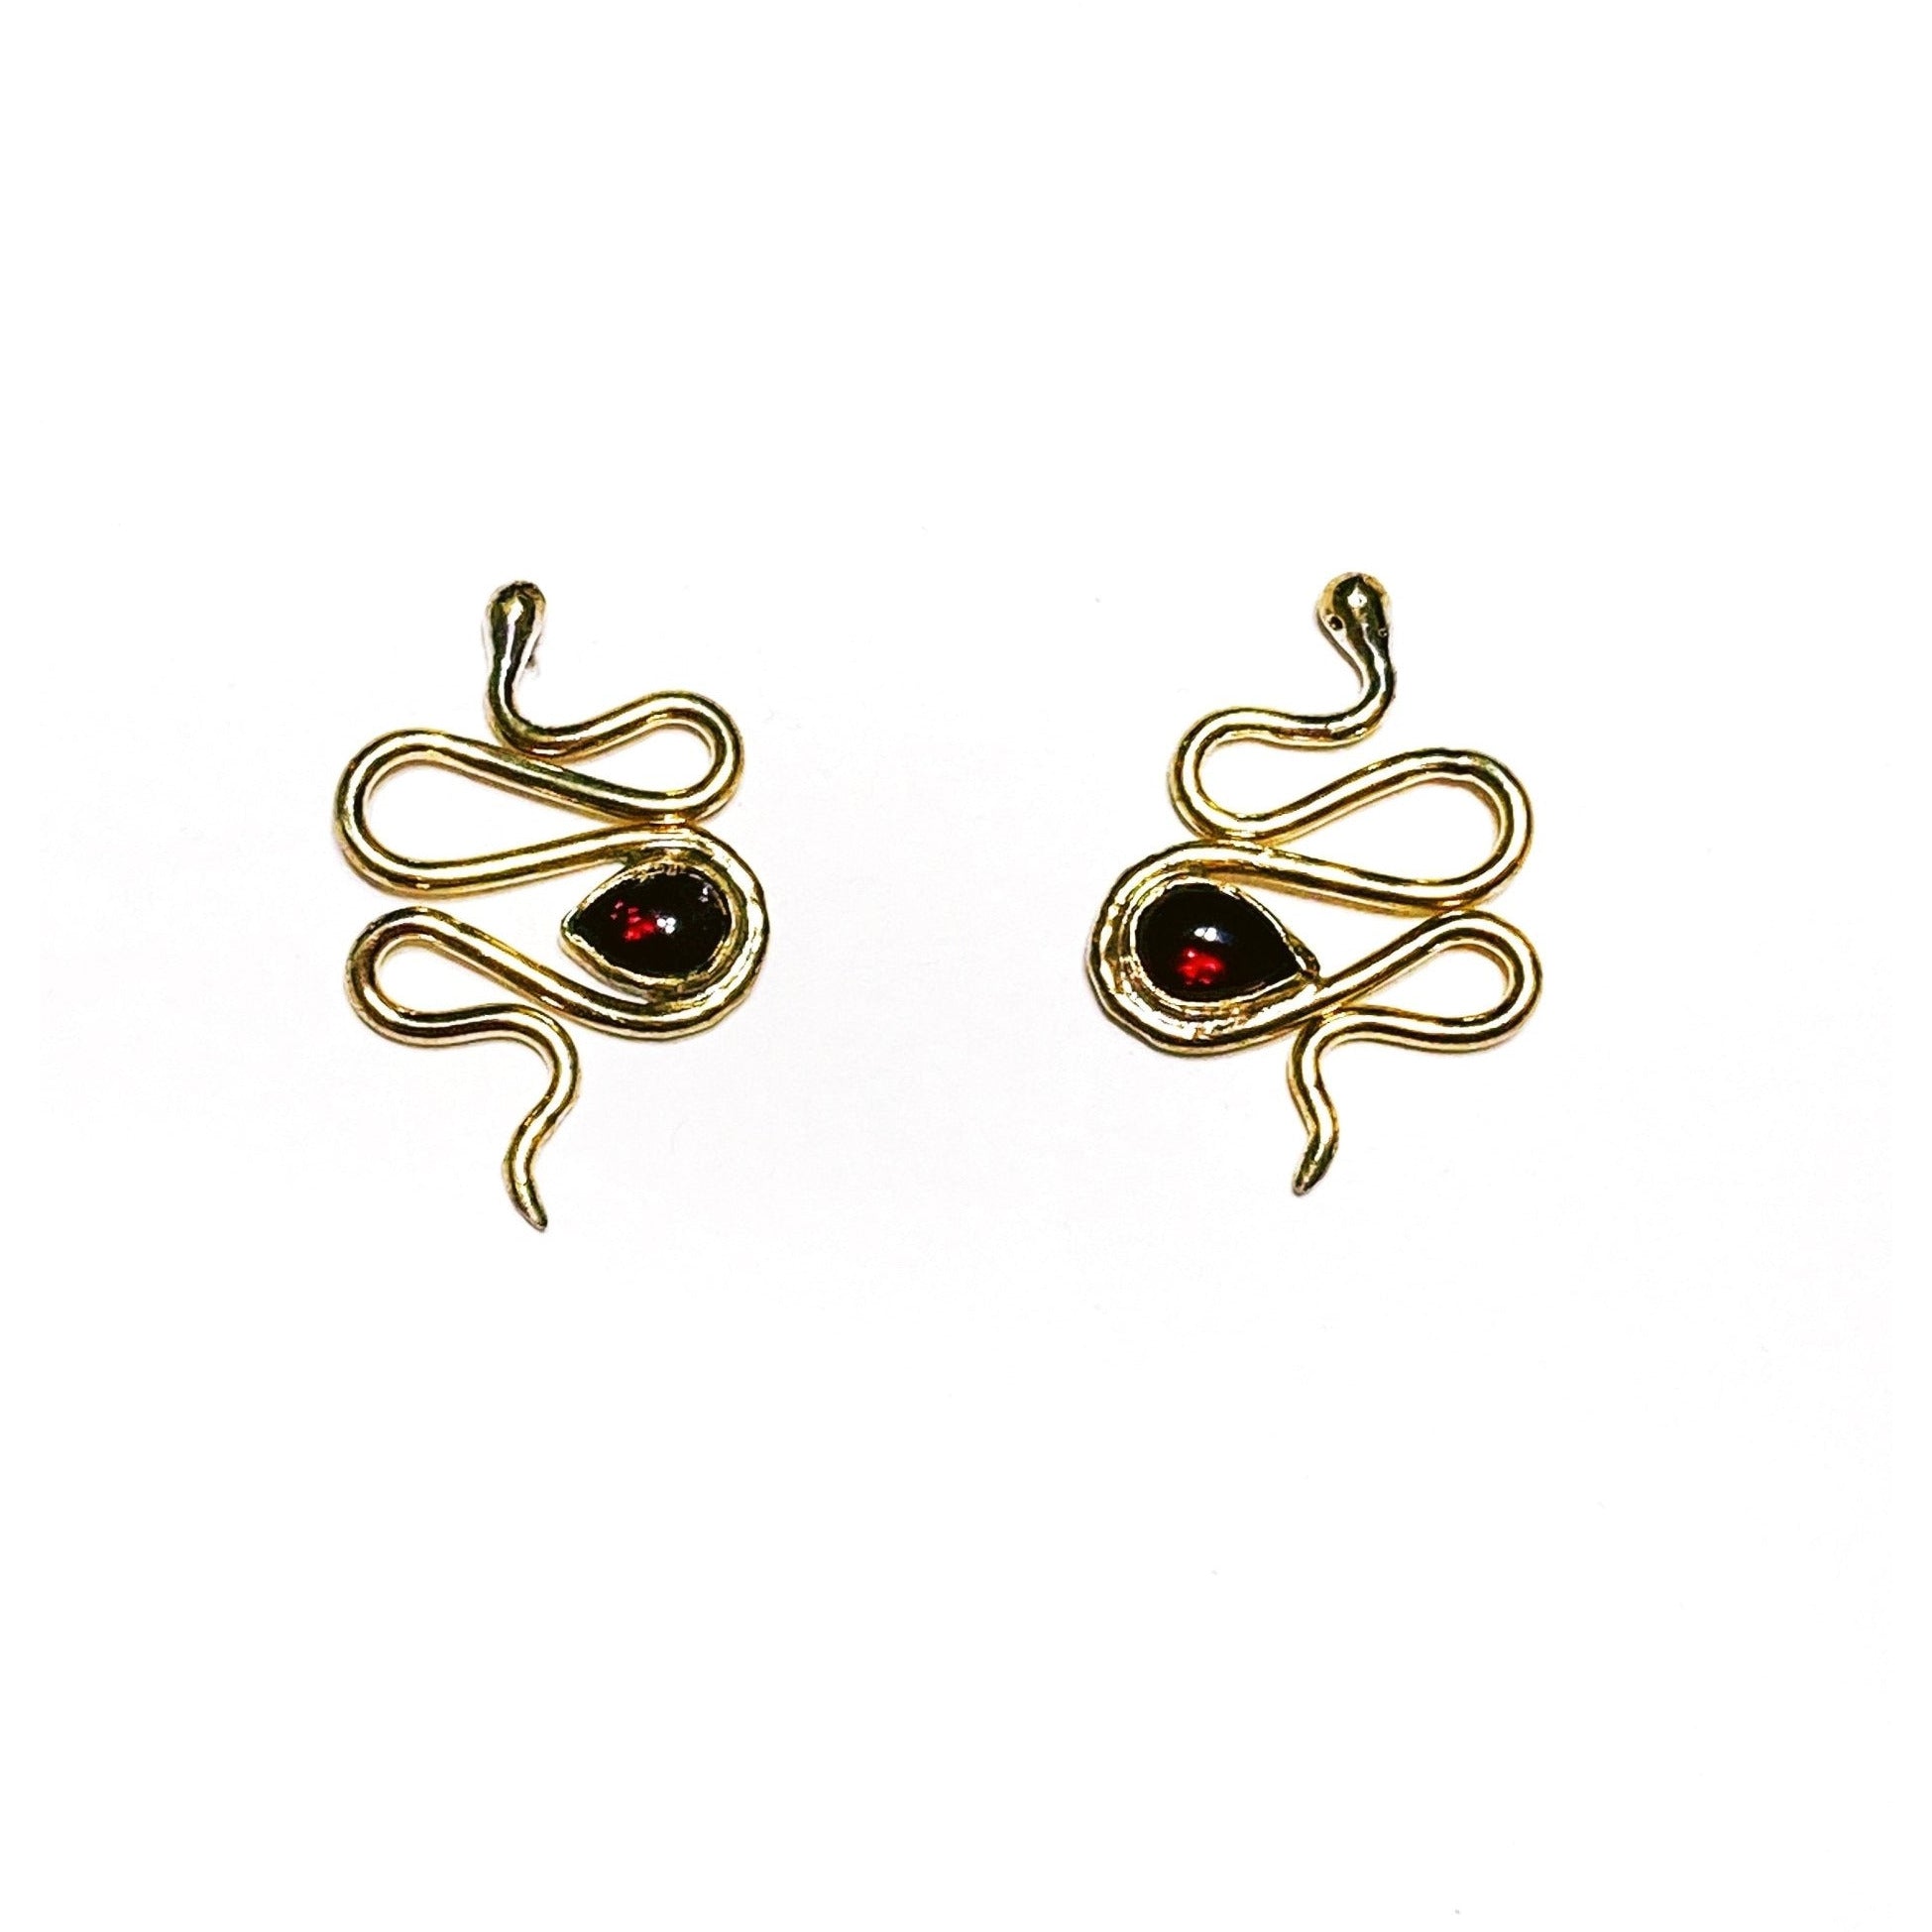 Sacred Serpent Studs - KME means the very best